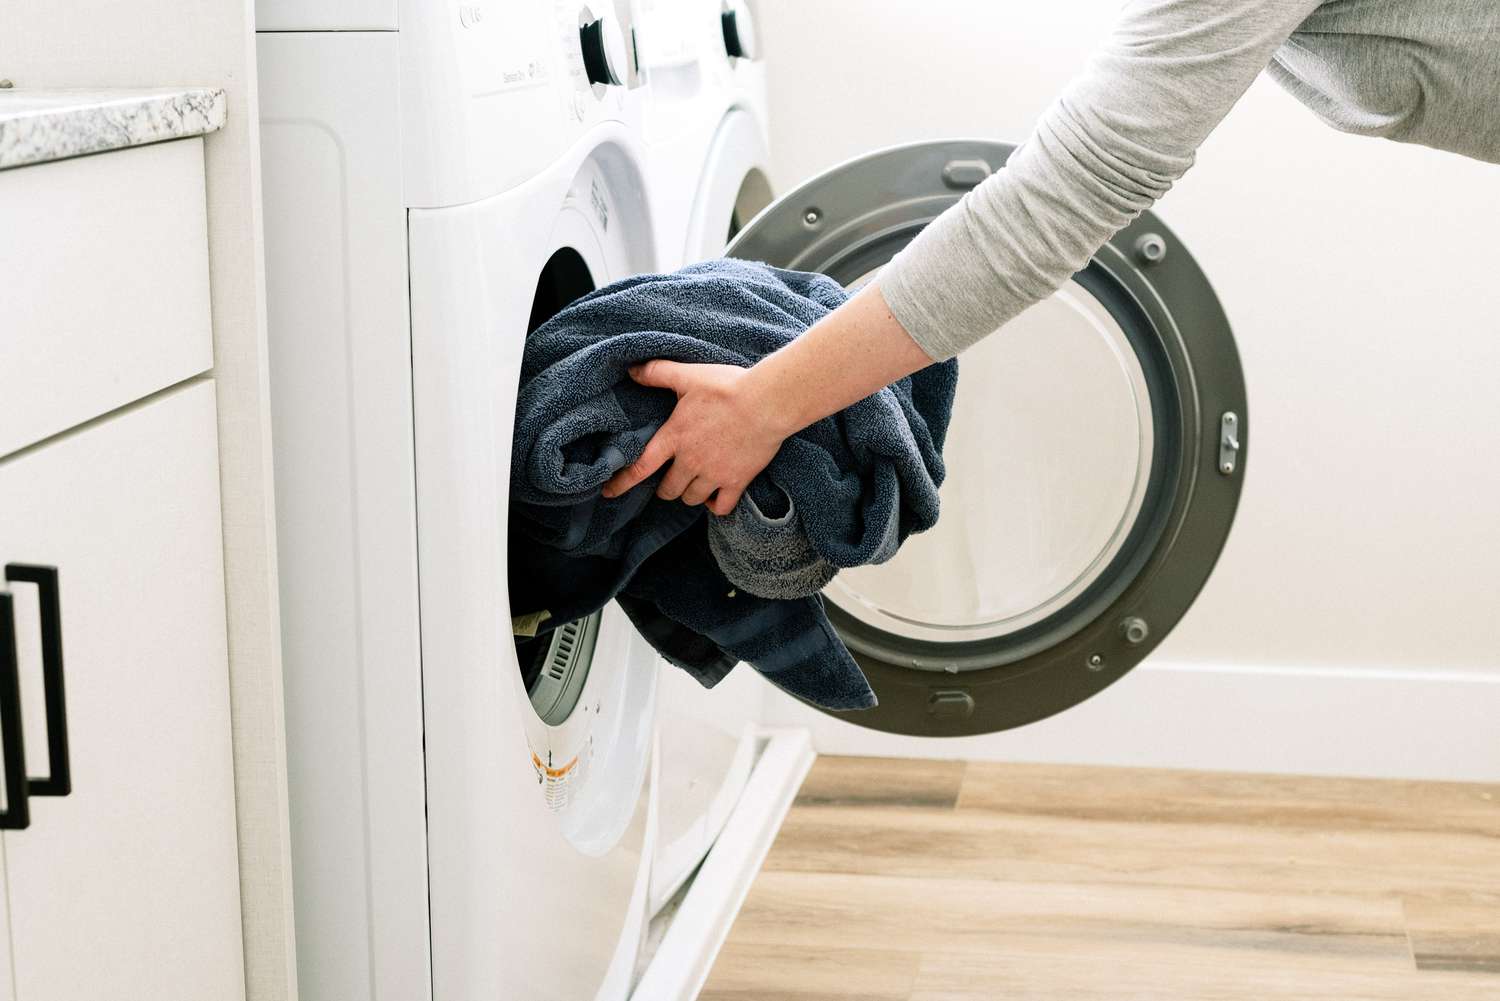 How To Sanitize Laundry To Disinfect Clothing, Linens, And Fabric